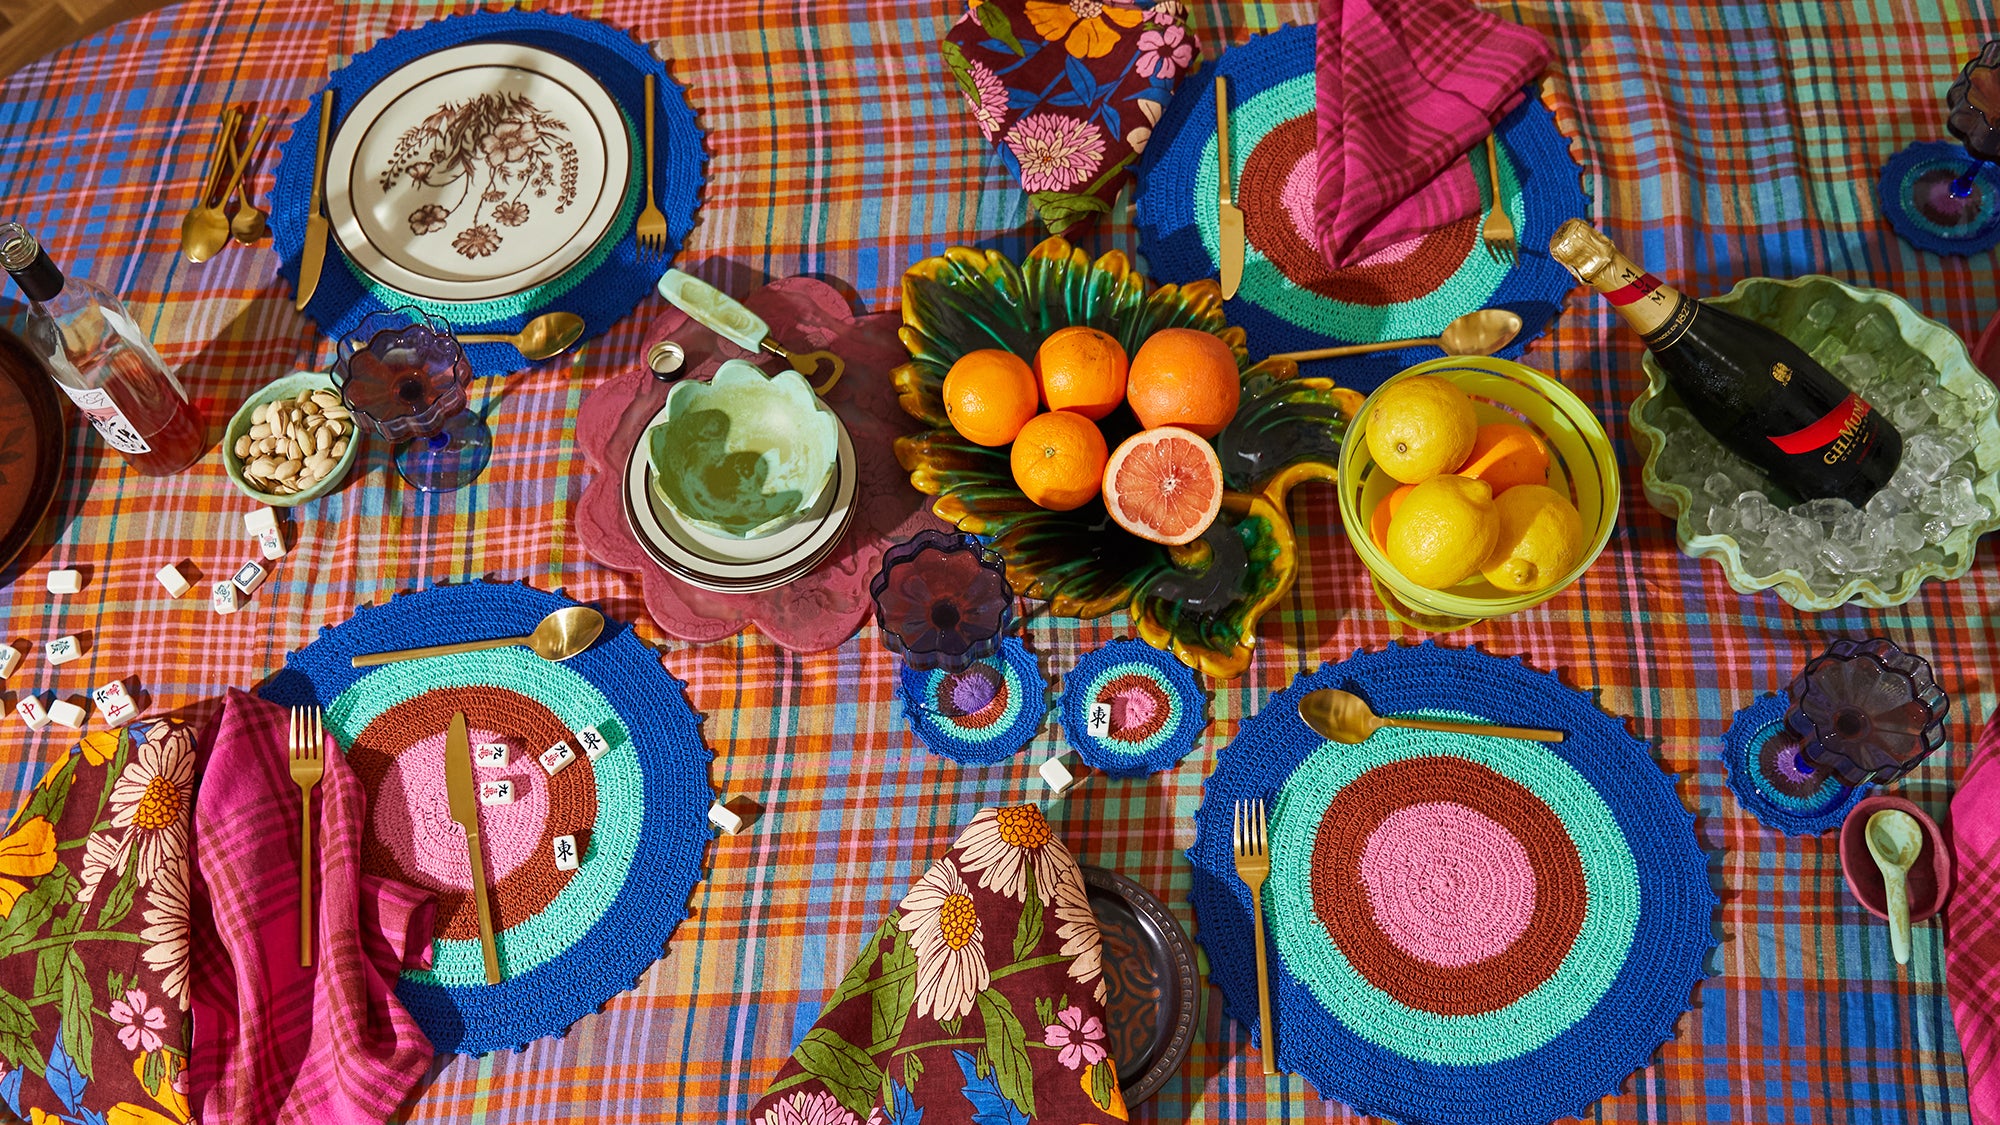 A table laden with colourful napkins, table cloth and beautiful food